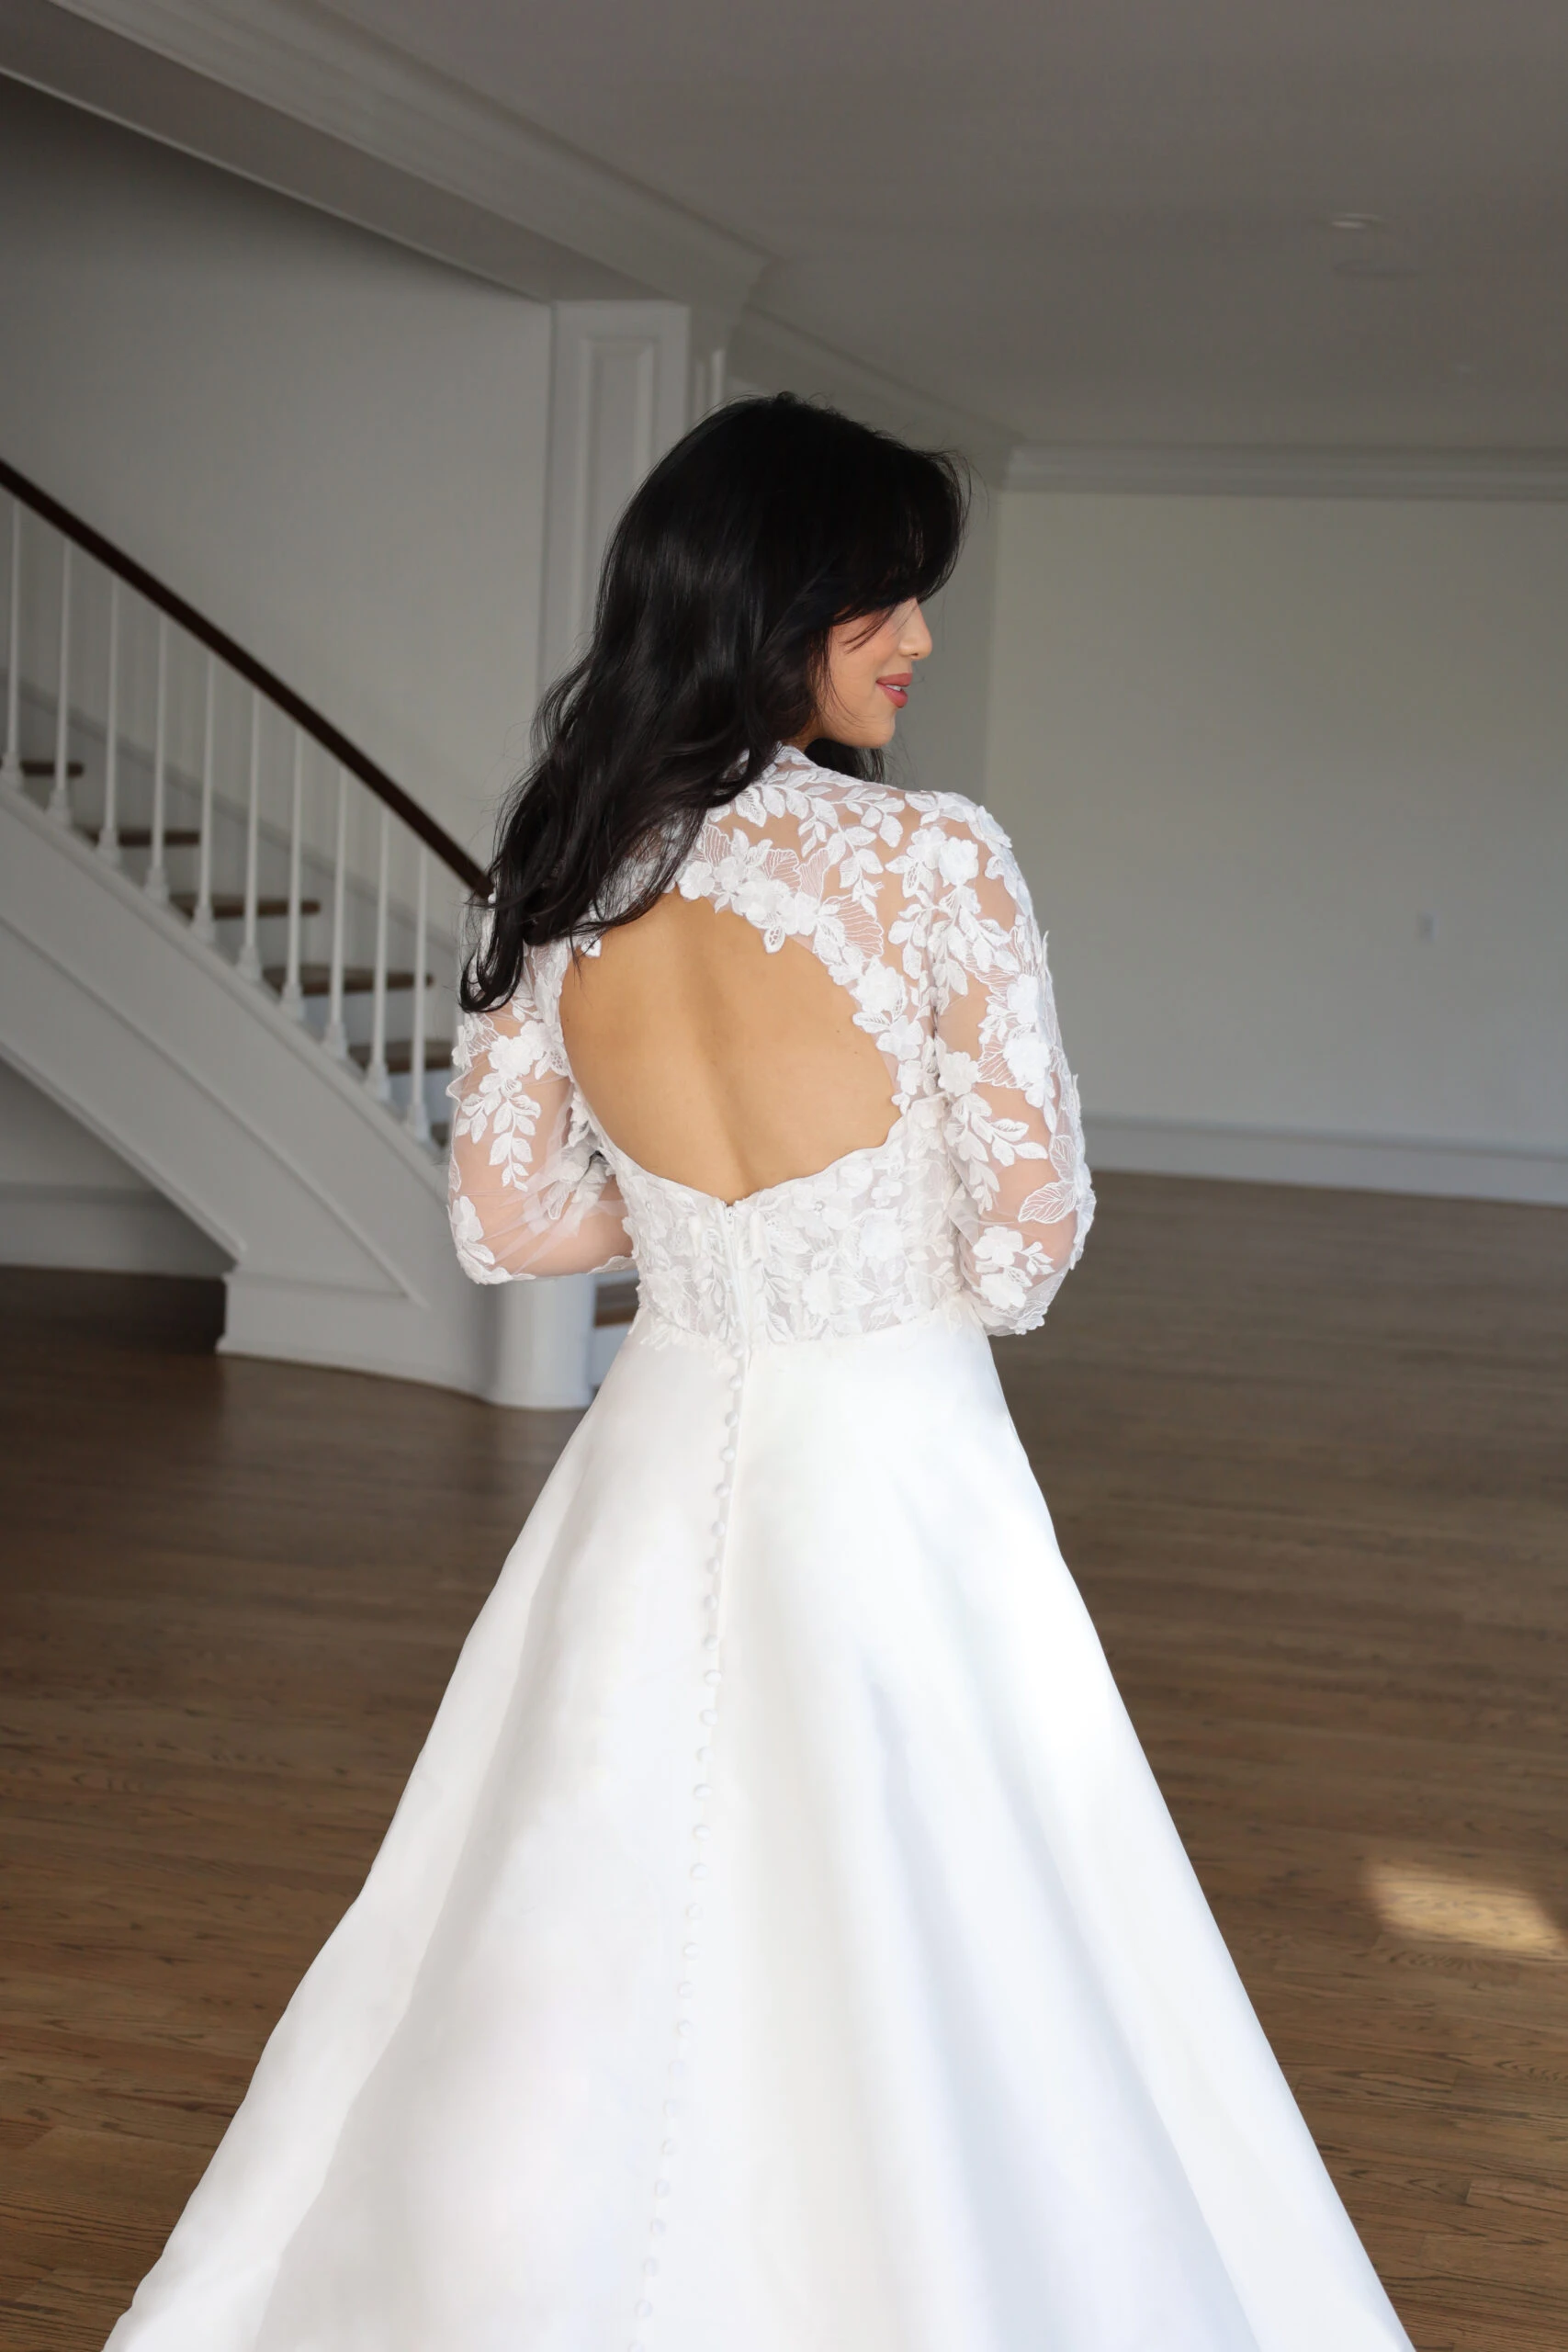 lace ballgown wedding dress with open back - D3715 by Essense of Australia